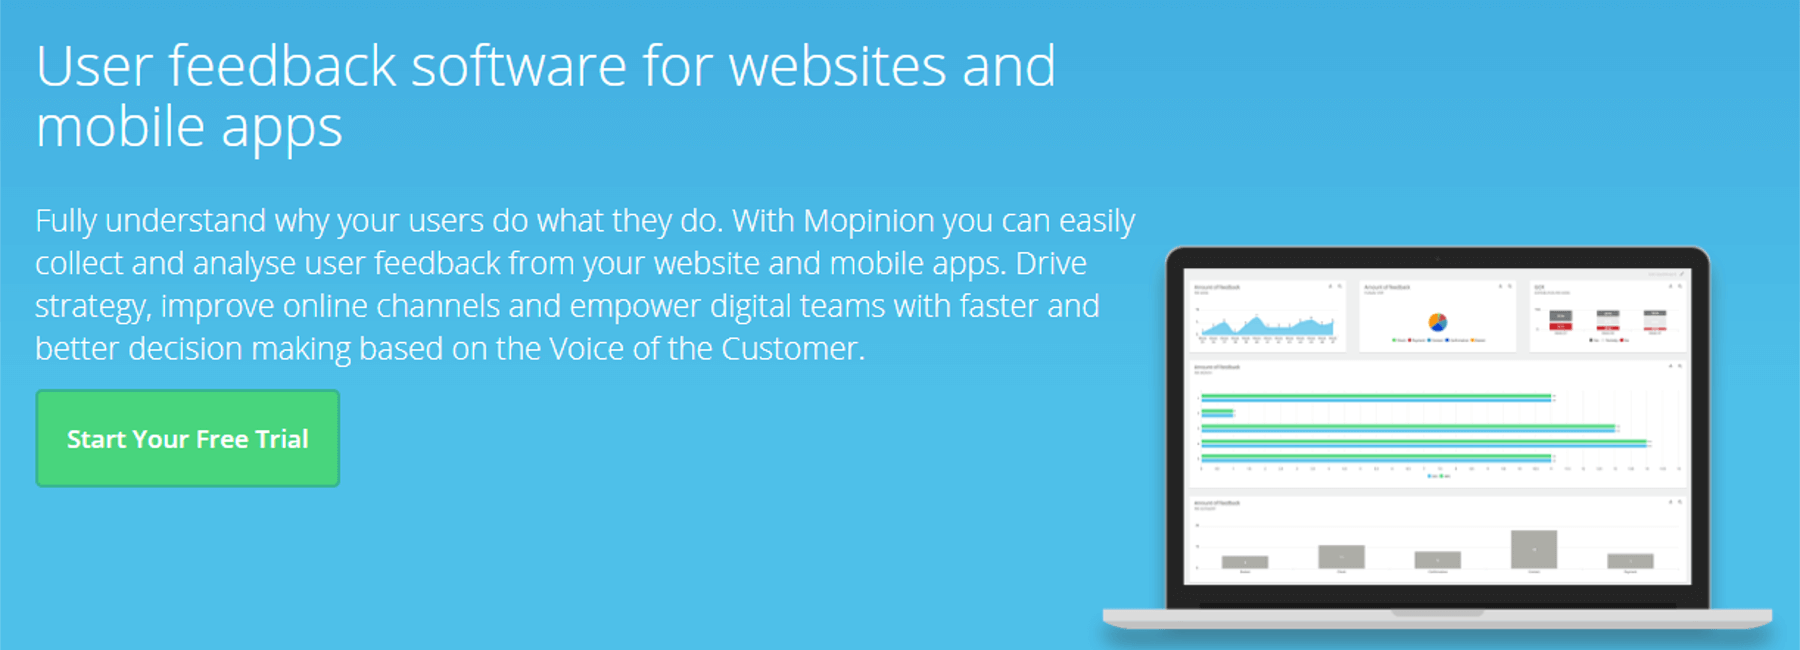 New and improved Product page on the Mopinion website